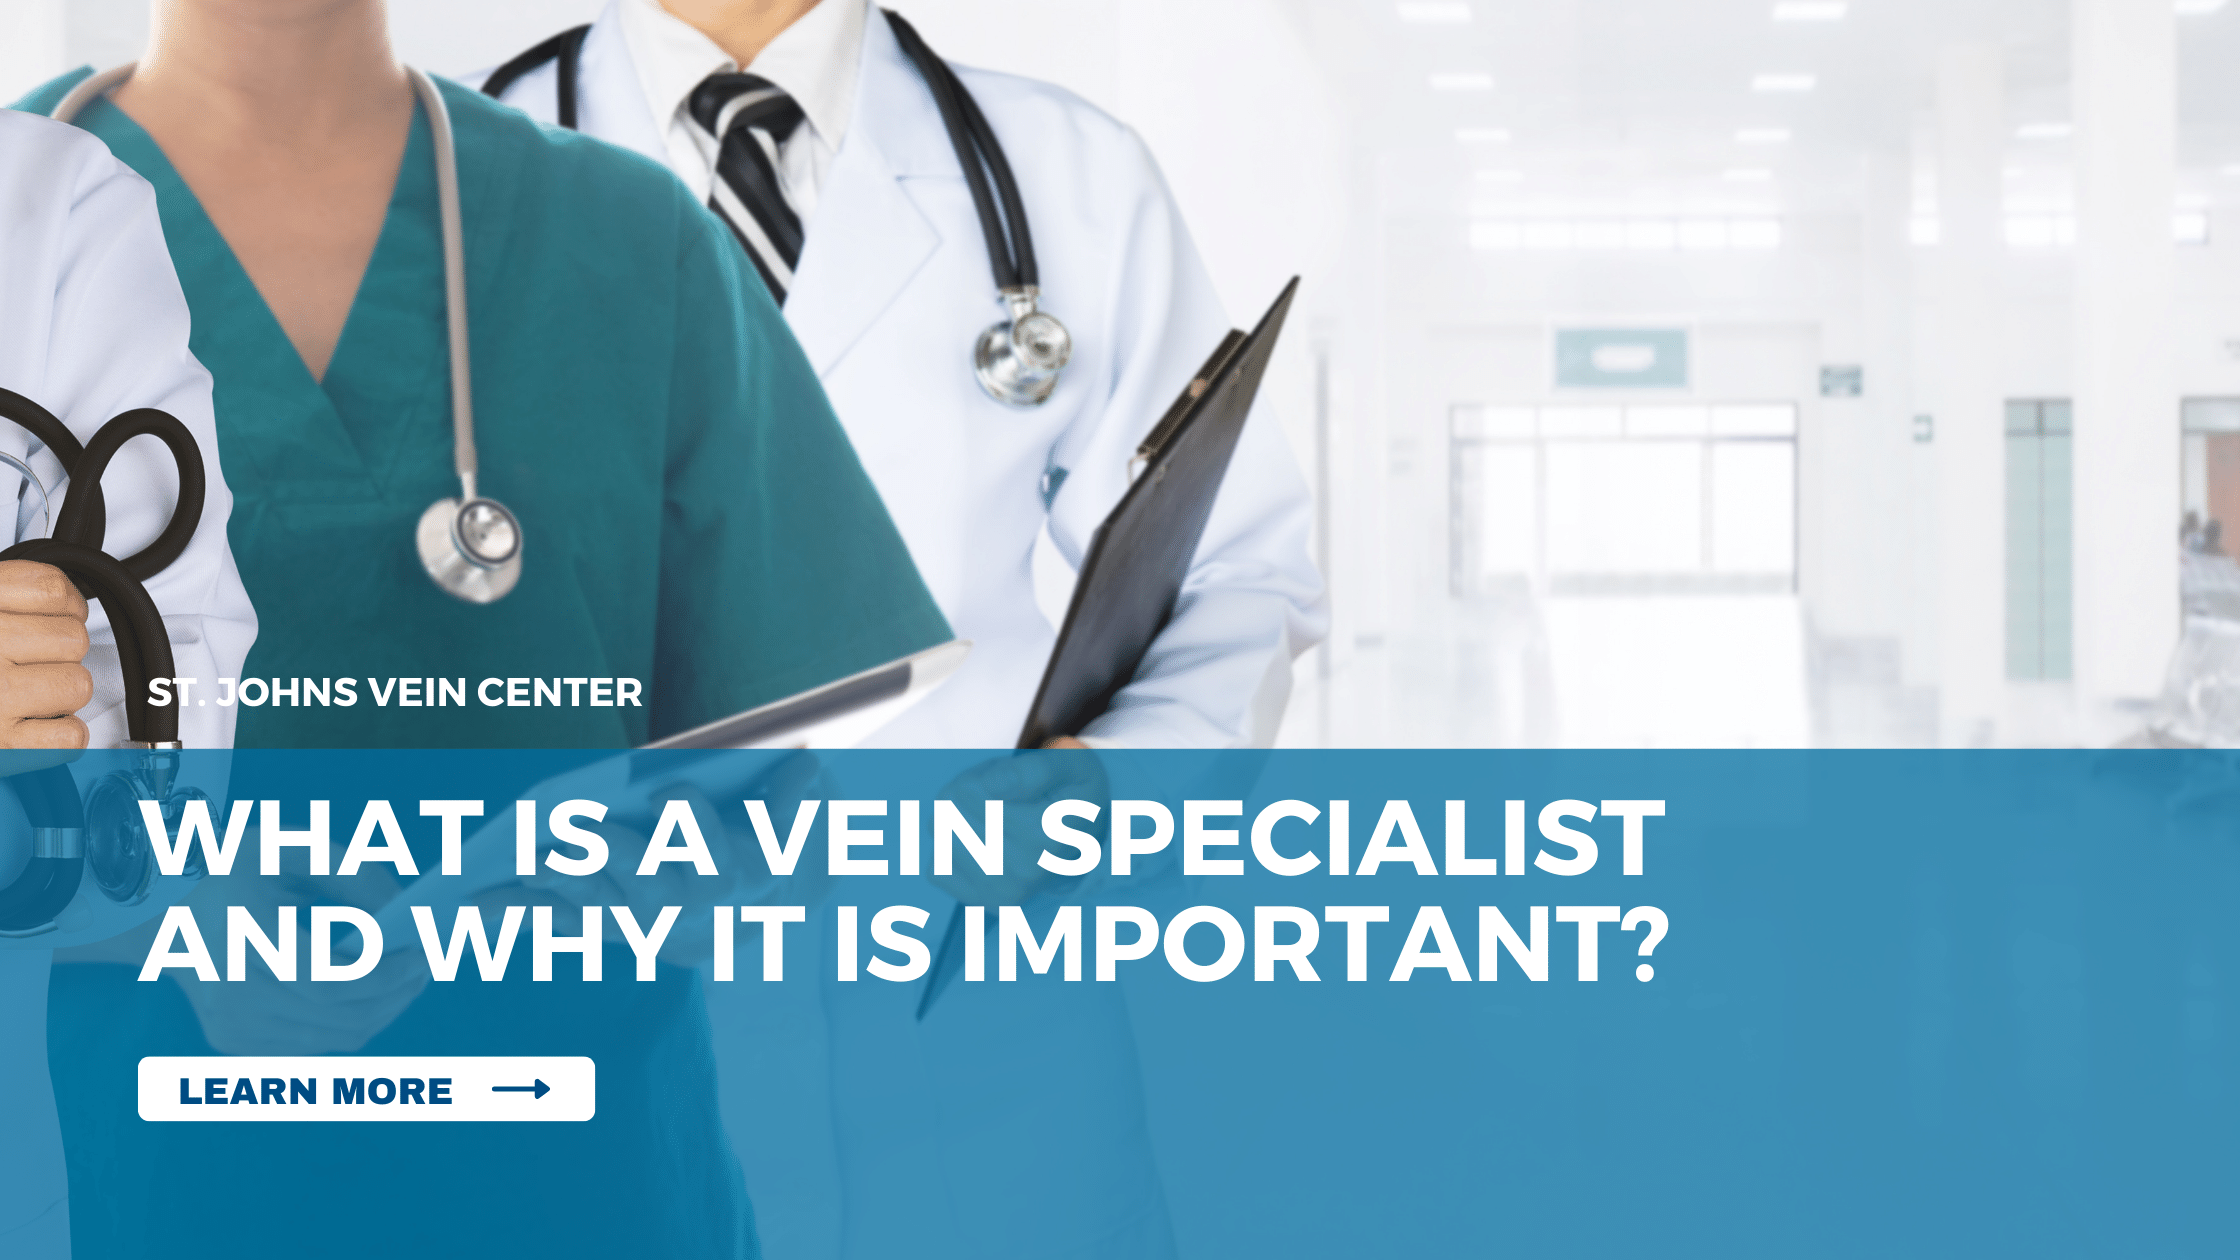 What Is a Vein Specialist and Why It Is Important